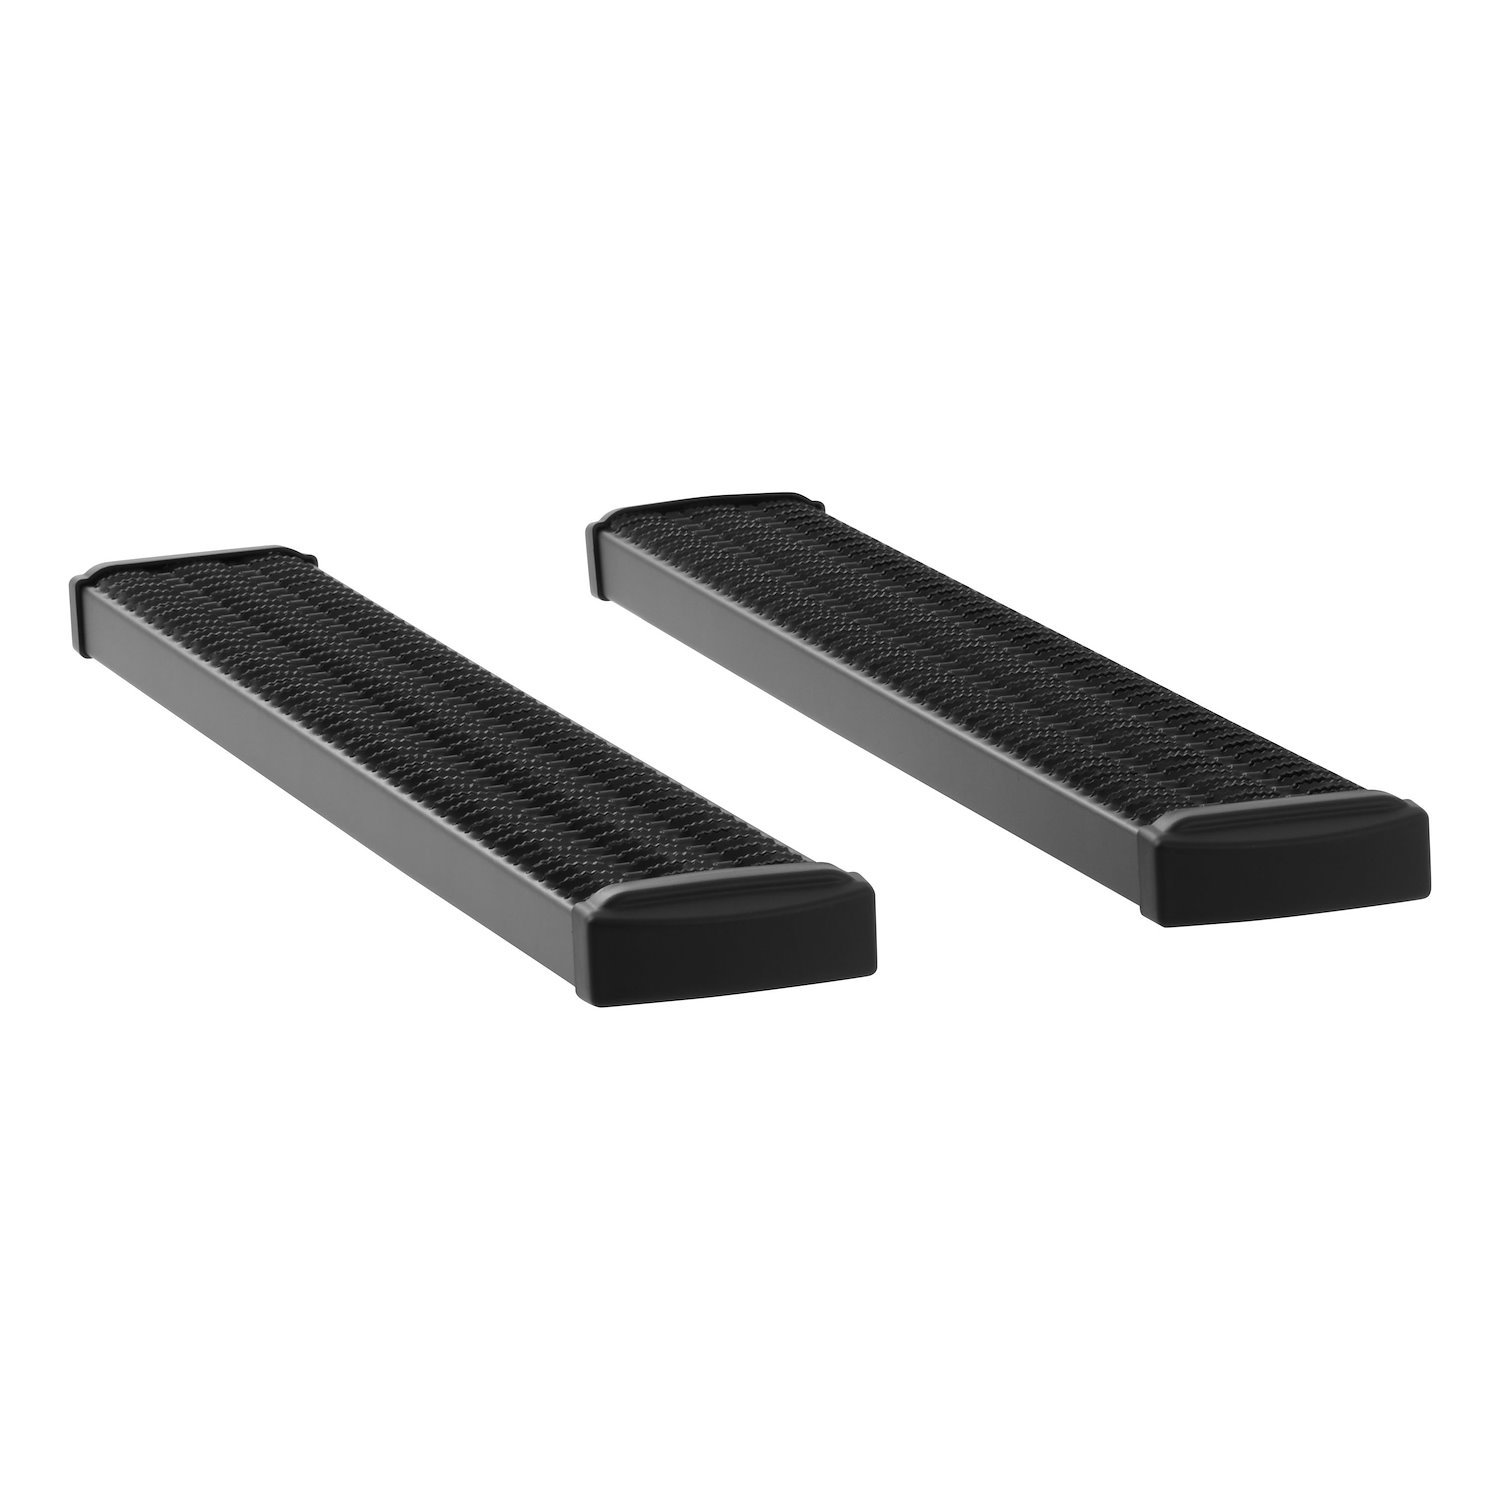 415054-401111 Grip Step 7 in. x 54 in. Black Aluminum Running Boards Fits Select Chevy Silverado, GMC Sierra